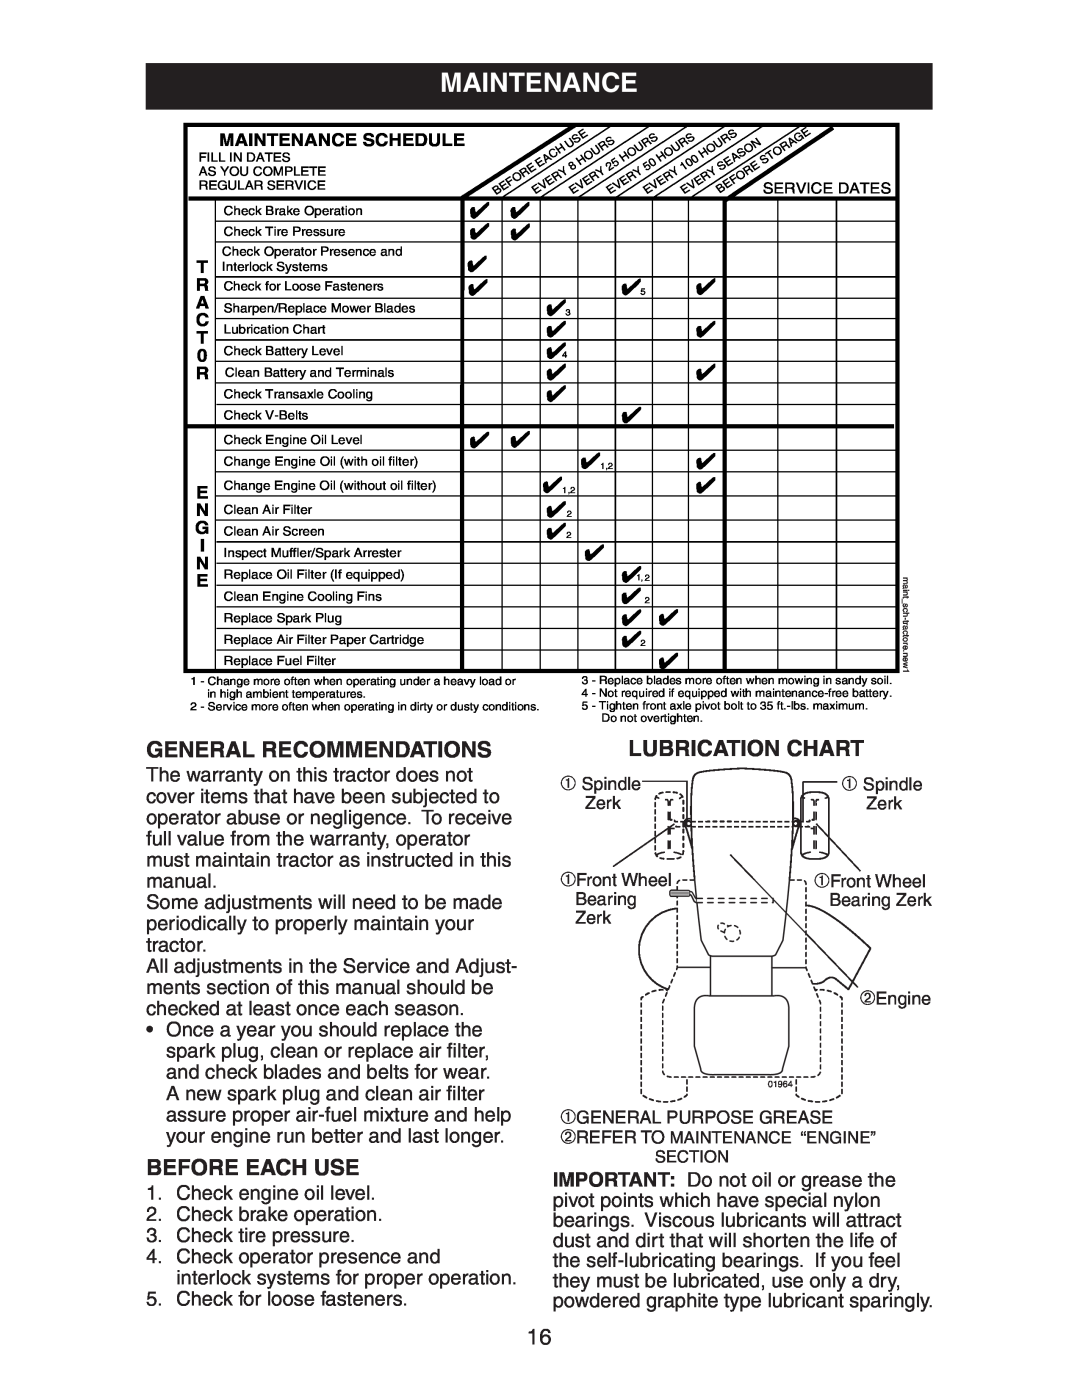 Poulan 271490 manual Maintenance, General Recommendations, Lubrication Chart, Before Each Use 